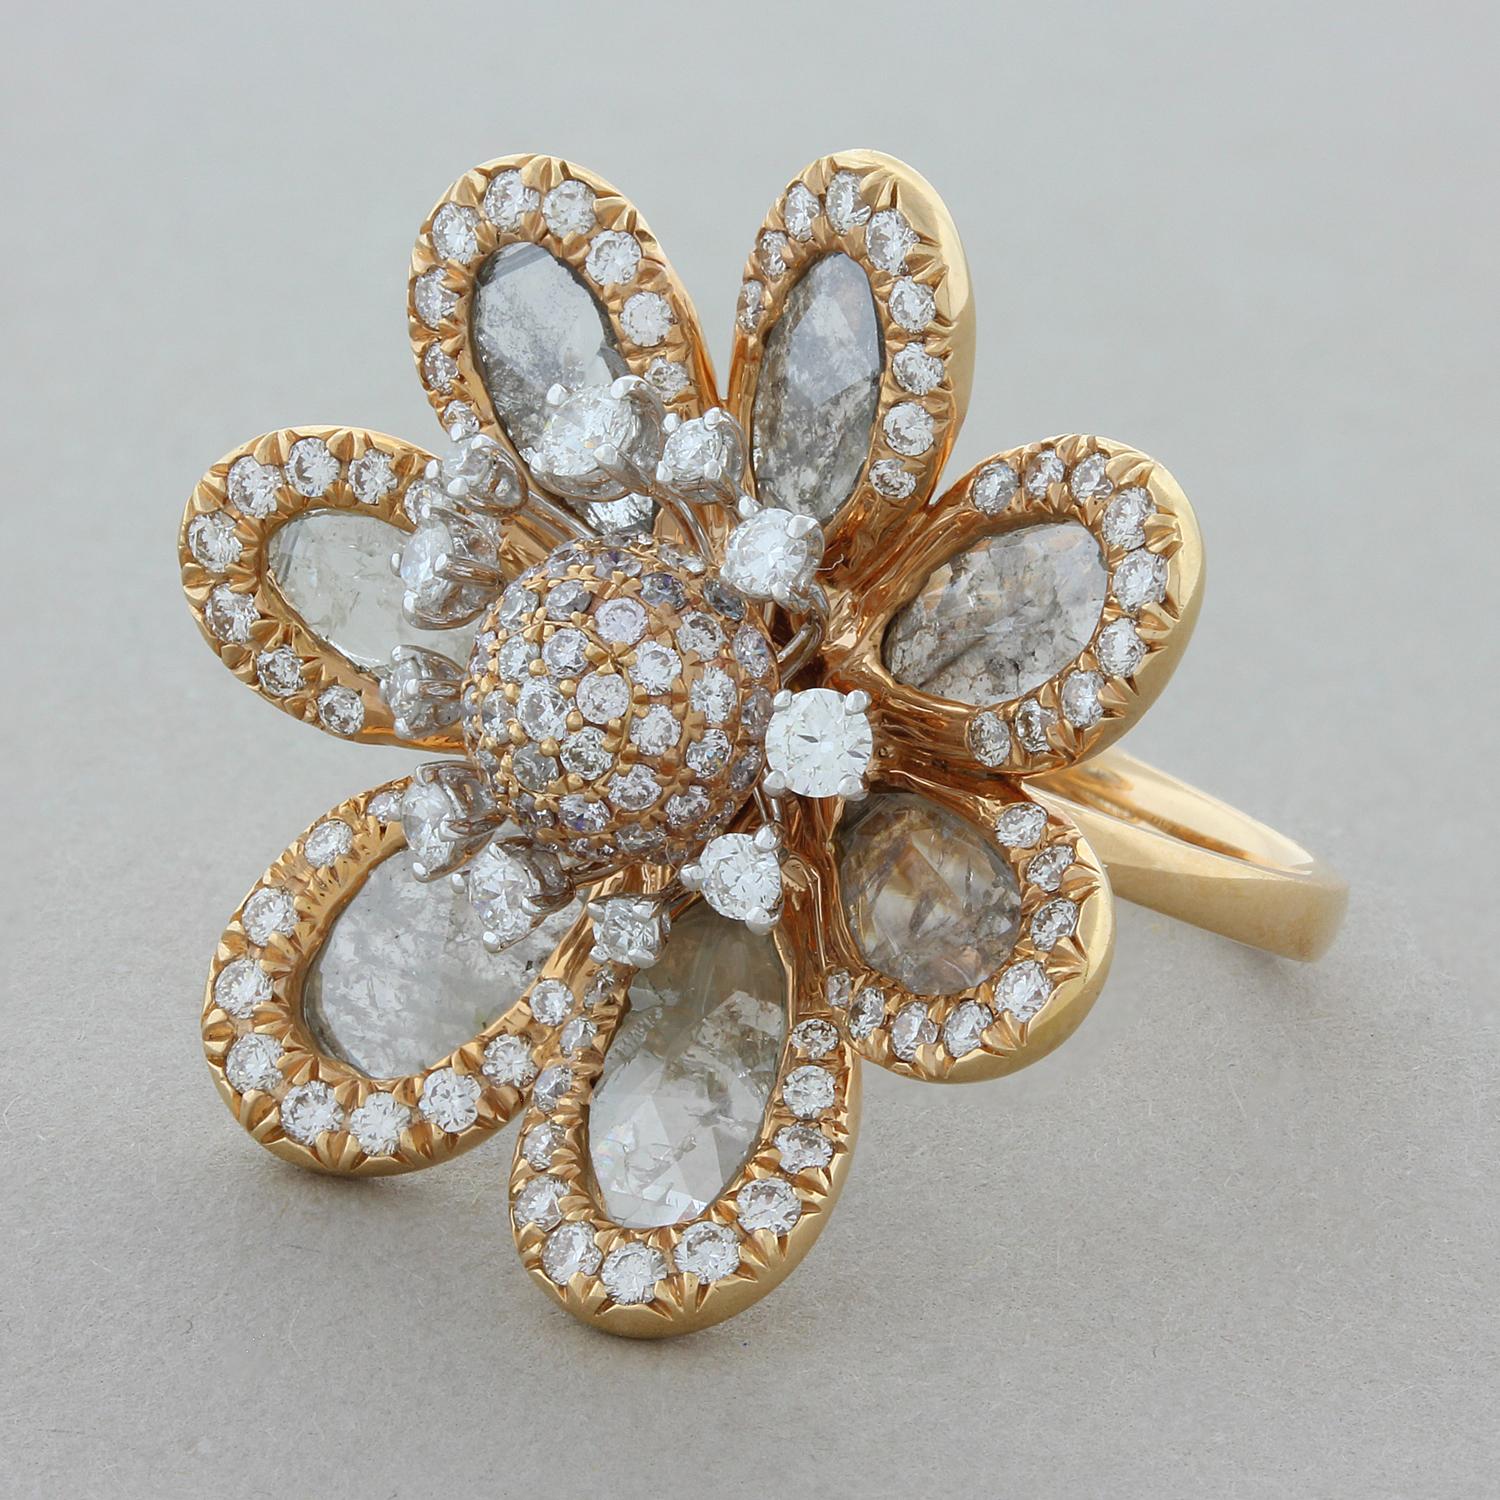 This flower cocktail ring featuring 4.53 carats of rose cut diamond slices for petals with full round cut diamonds haloing each petal as well as for the stamens in the center along with pave set diamonds. This exceptional ring is set in 18K rose